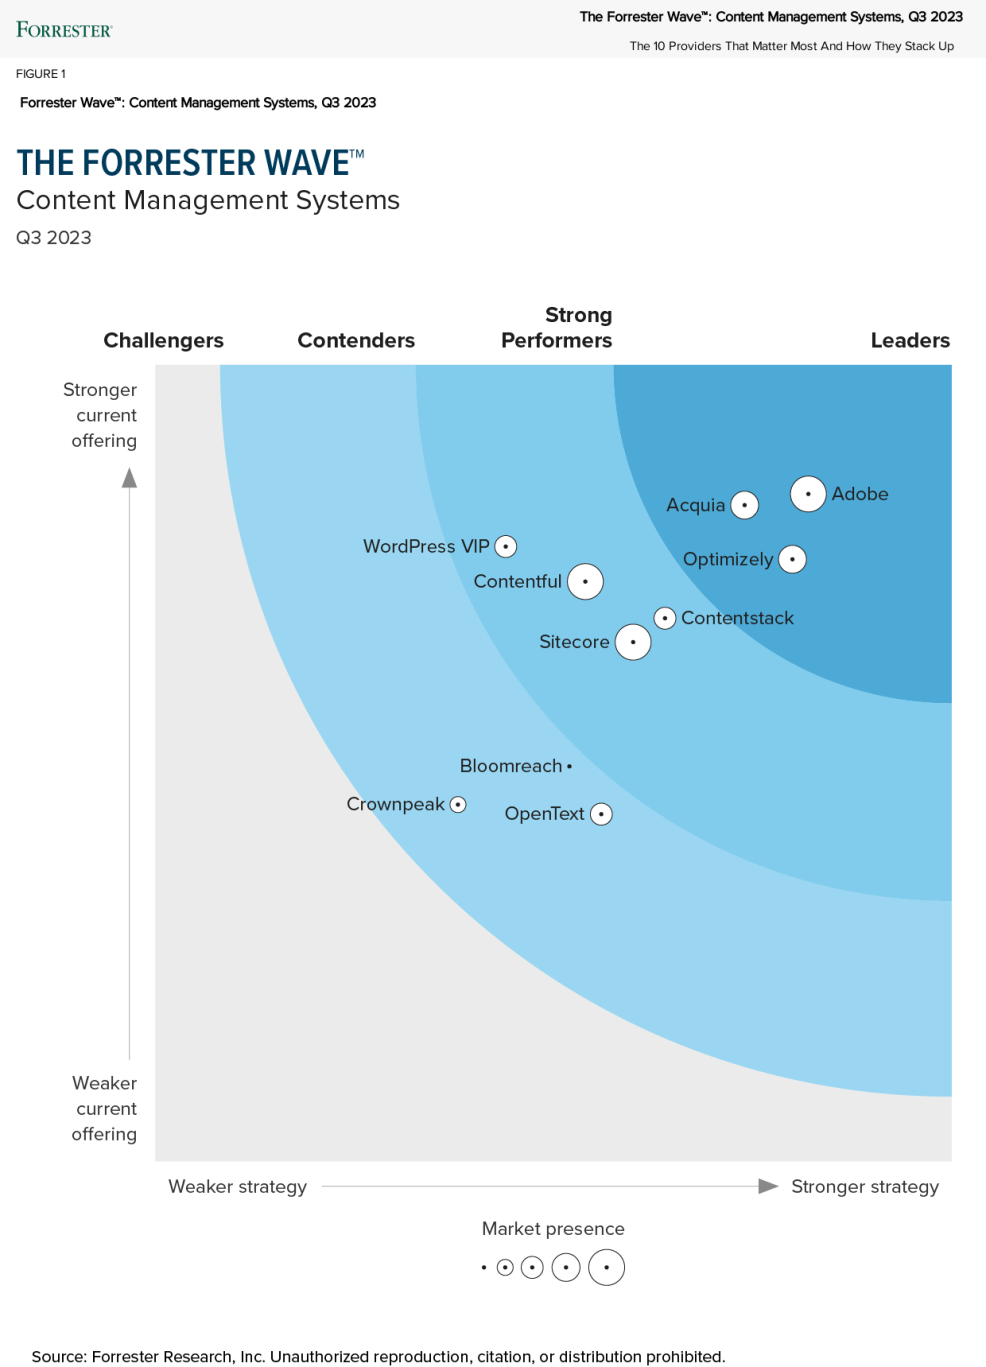 Forrester Wave: Content Management Systems Q3 2023 Leadership Chart